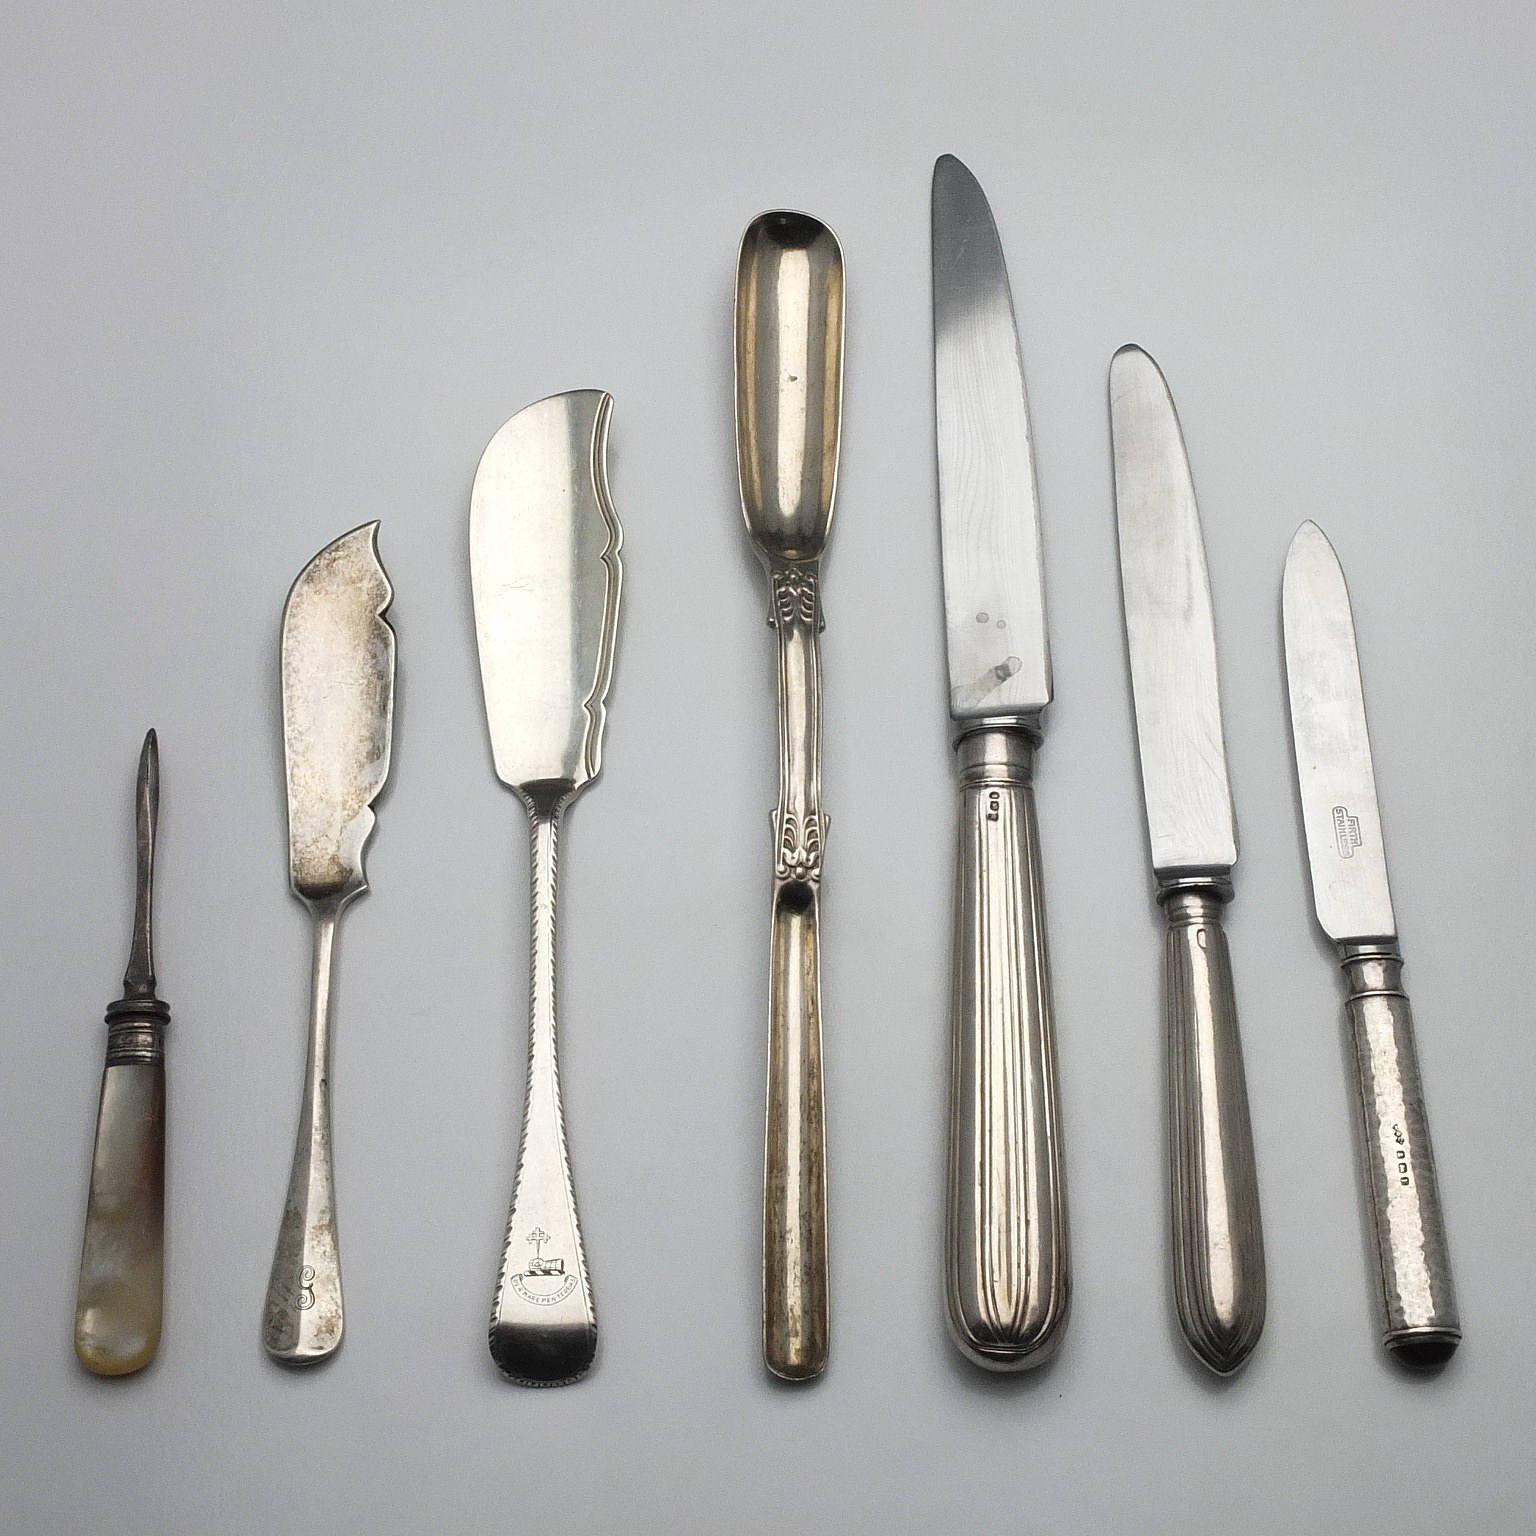 'Sterling Silver Marrow Scoop, Two Sterling Fish Servers, Three Sterling Handled Knives and a Mother of Pearl and Sterling Sewing Hook'